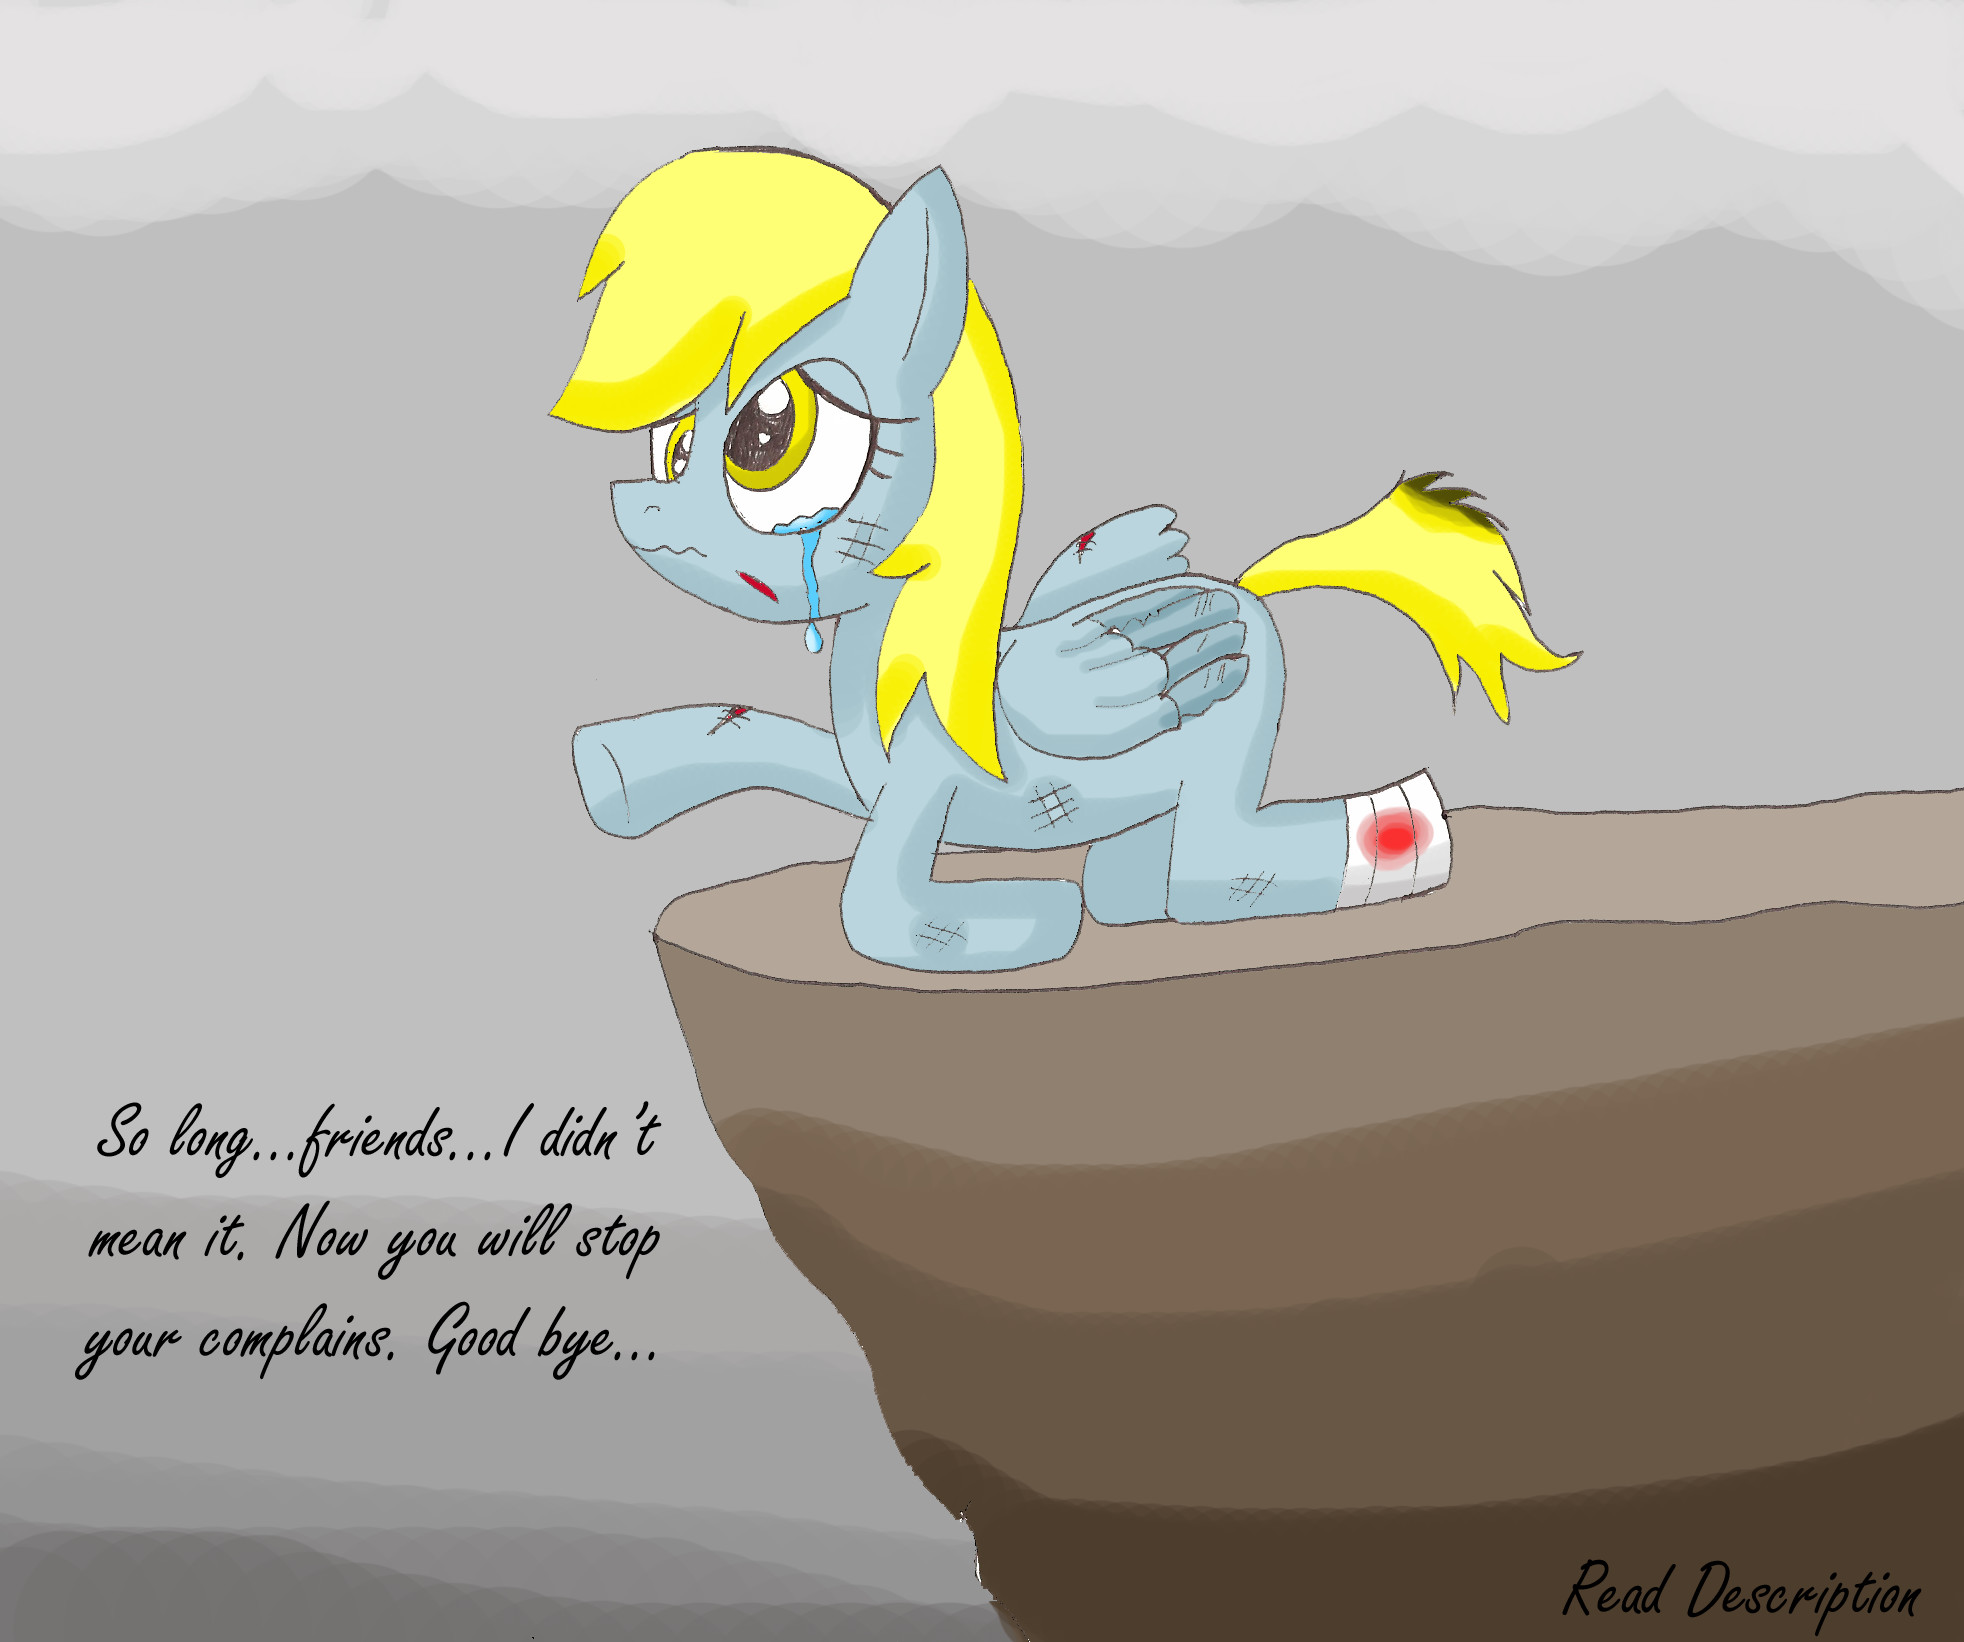 1964x1642 Derpy Hooves (MLP FiM) images save derpy HD wallpaper and background photos